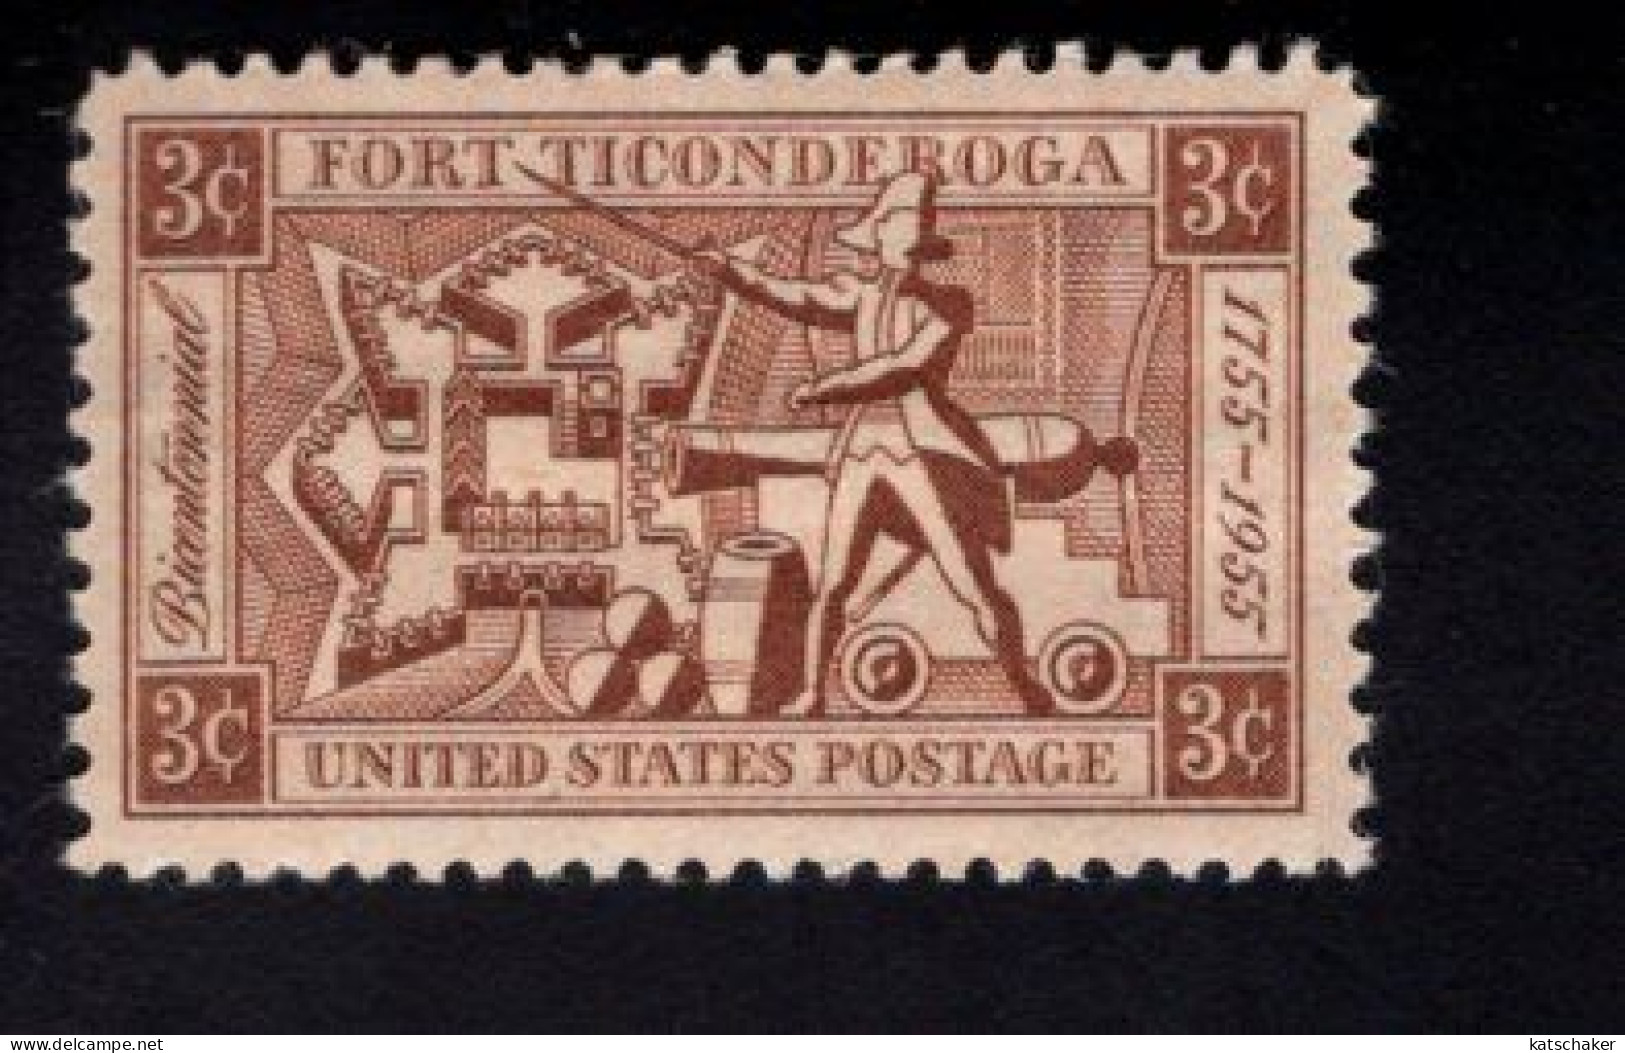 2018737274 1955 SCOTT 1071 (XX) POSTFRIS MINT NEVER HINGED  - FORT TICONDEROGA ISSUE - MAP OF THE FORT - Unused Stamps